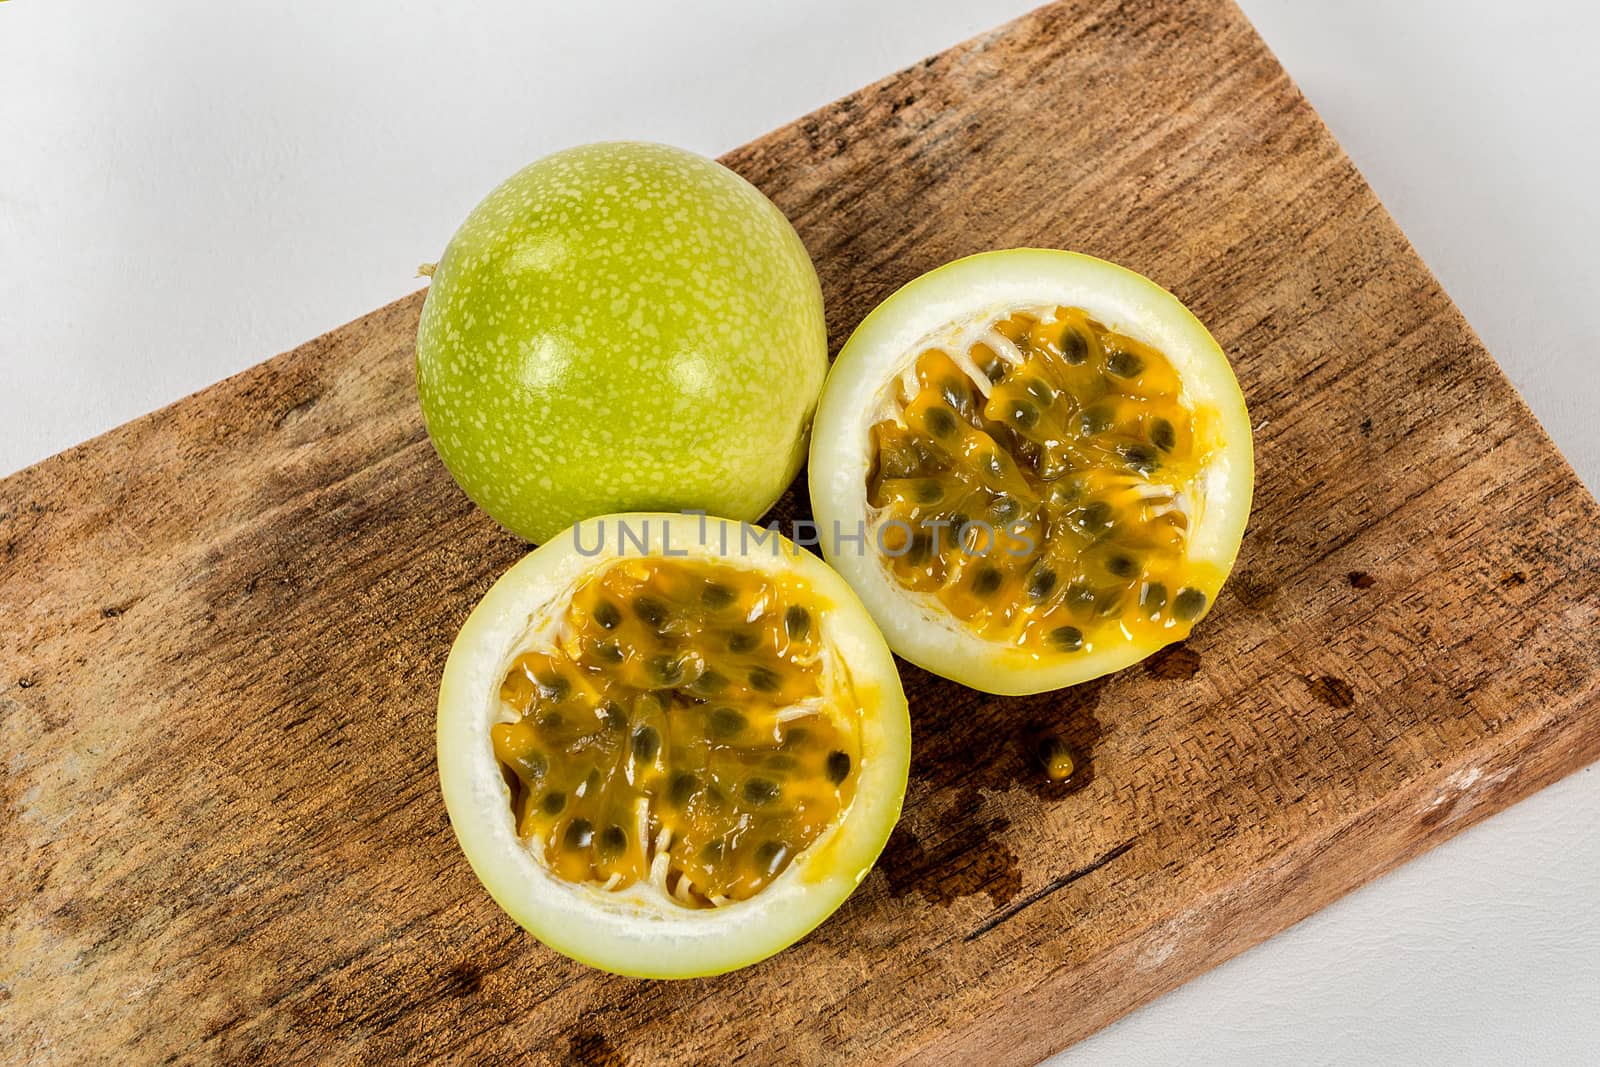 Passion fruit by jrivalta